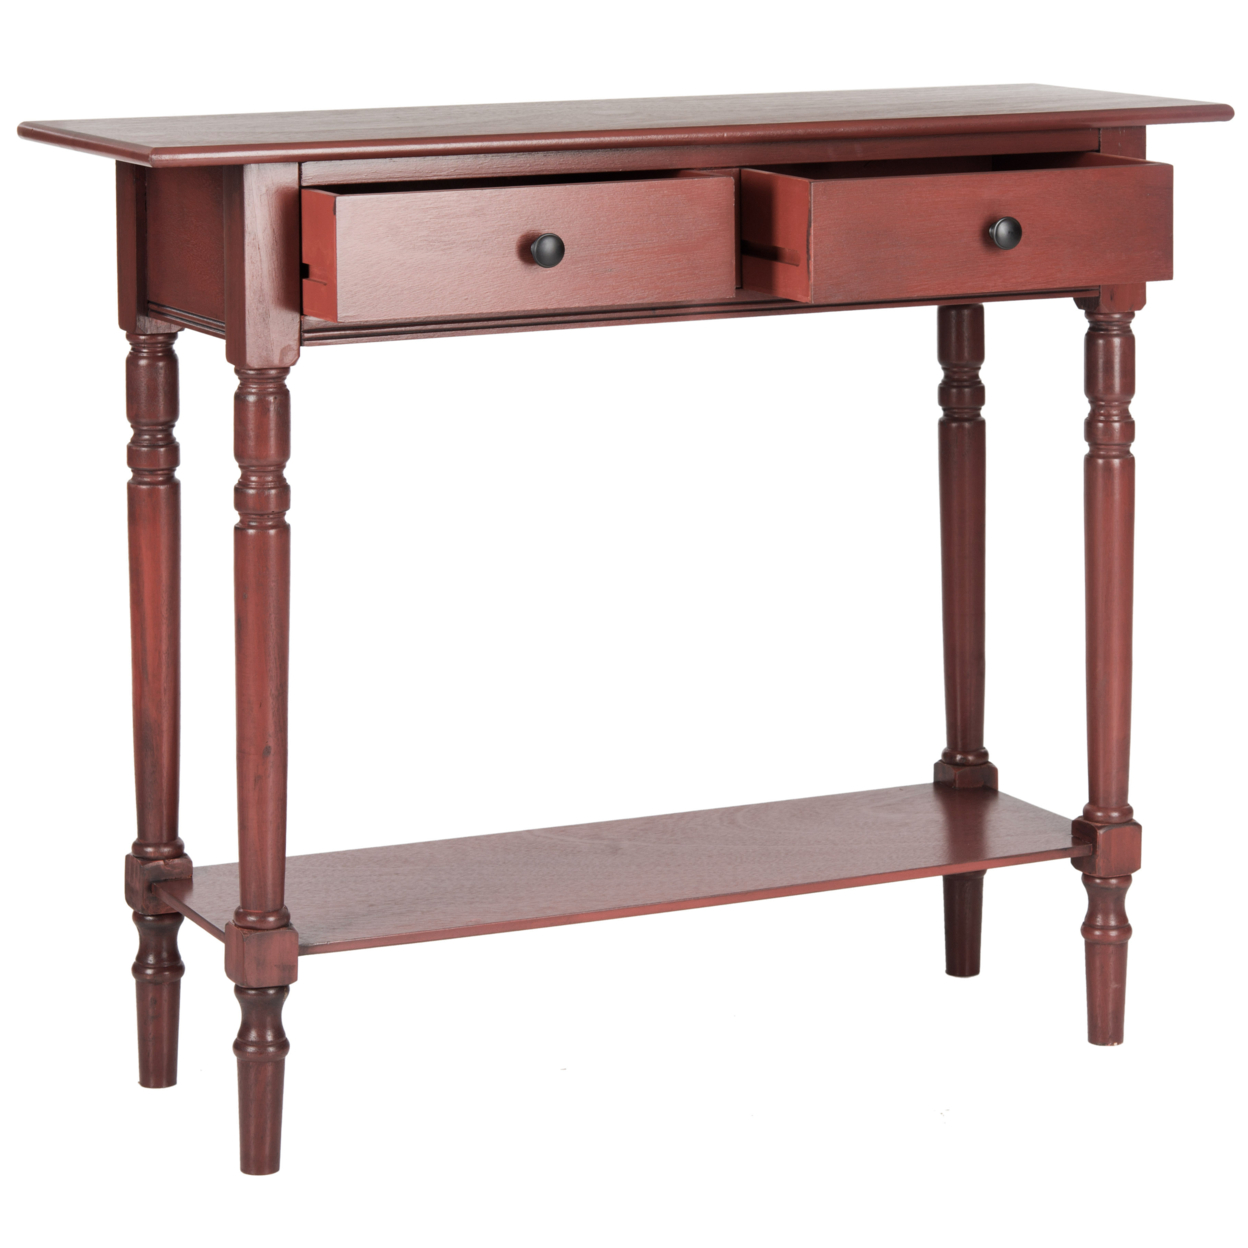 SAFAVIEH Rosemary 2-Drawer Console Table Red